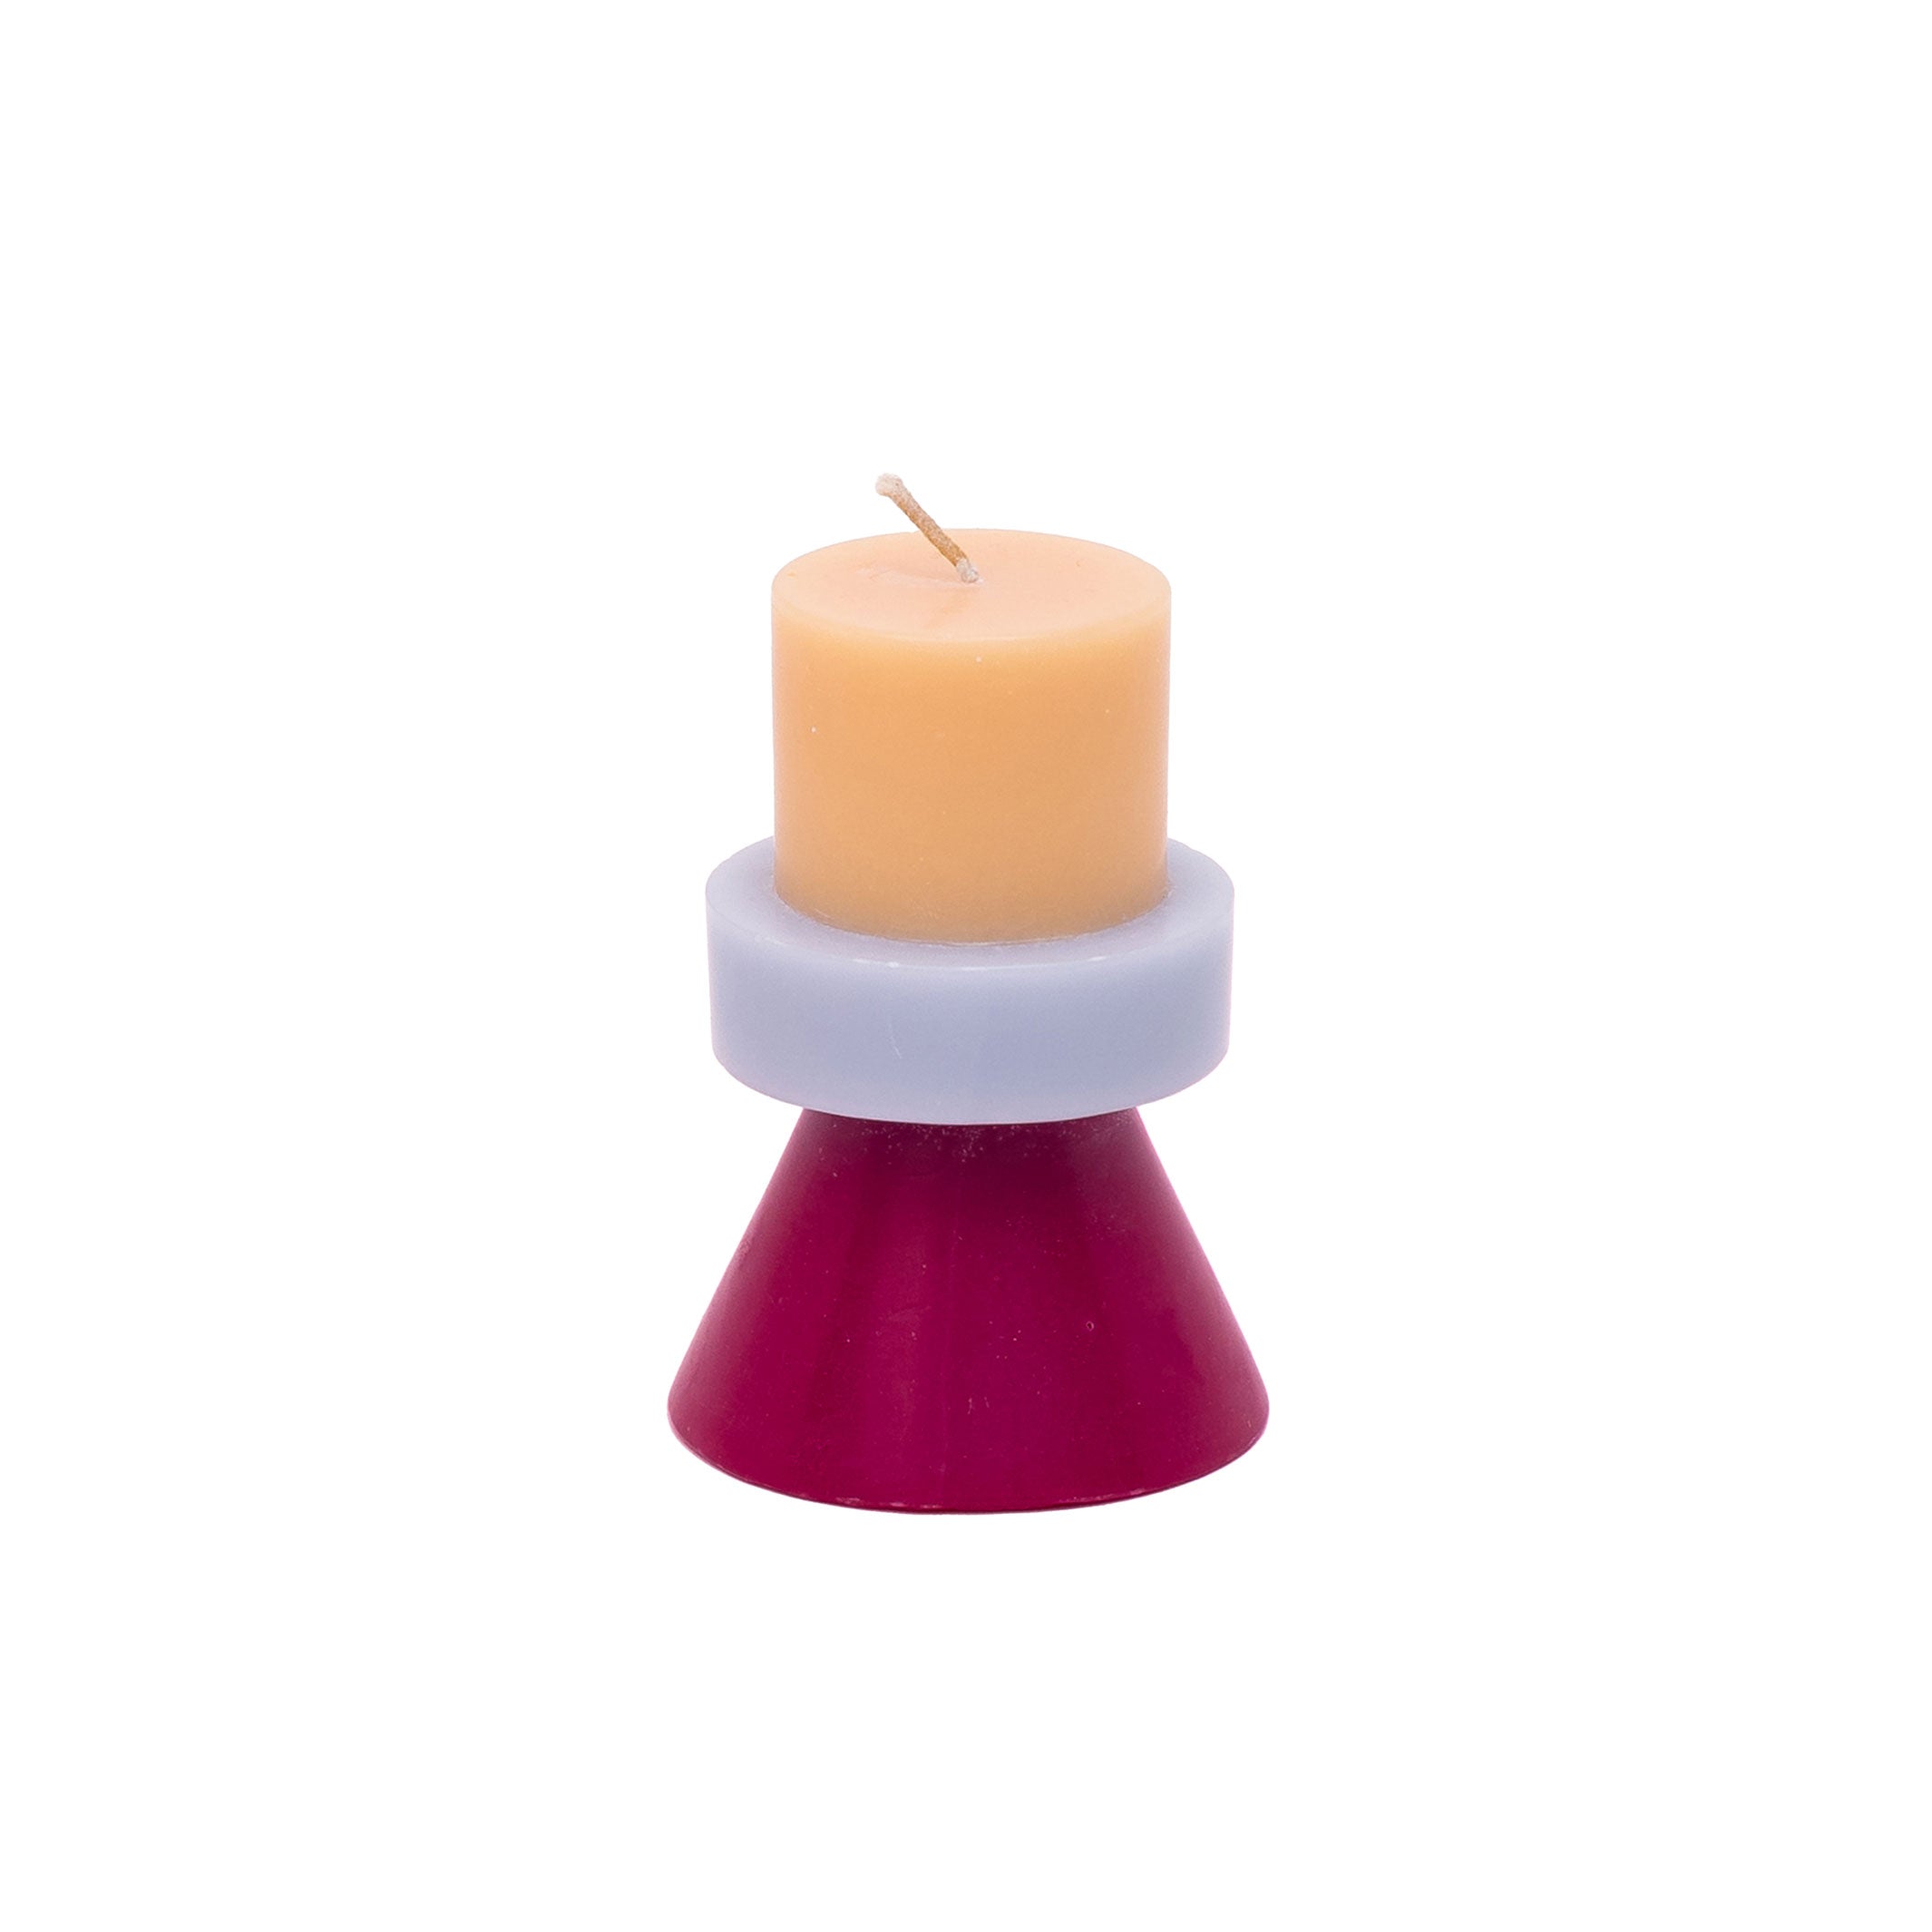 STACK CANDLE MINI | Colors peach-lilac-ruby | 20 hrs. burning time | YOD AND CO